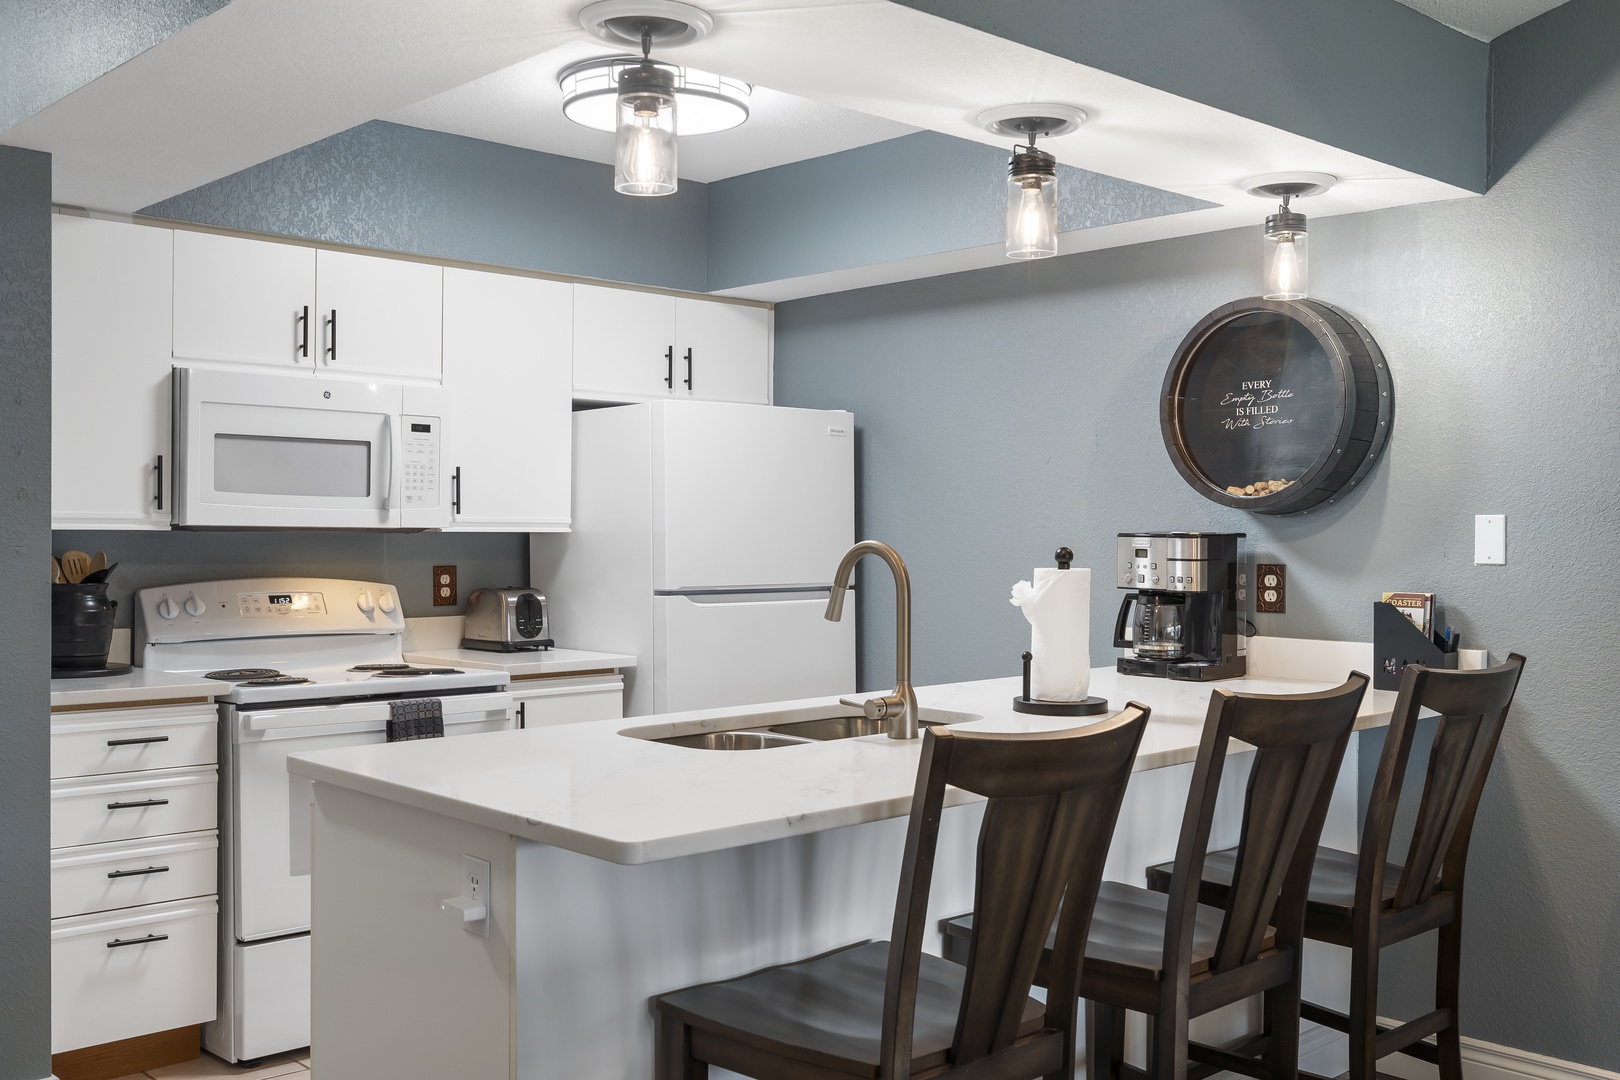 The open, breezy kitchen offers ample space & every home comfort